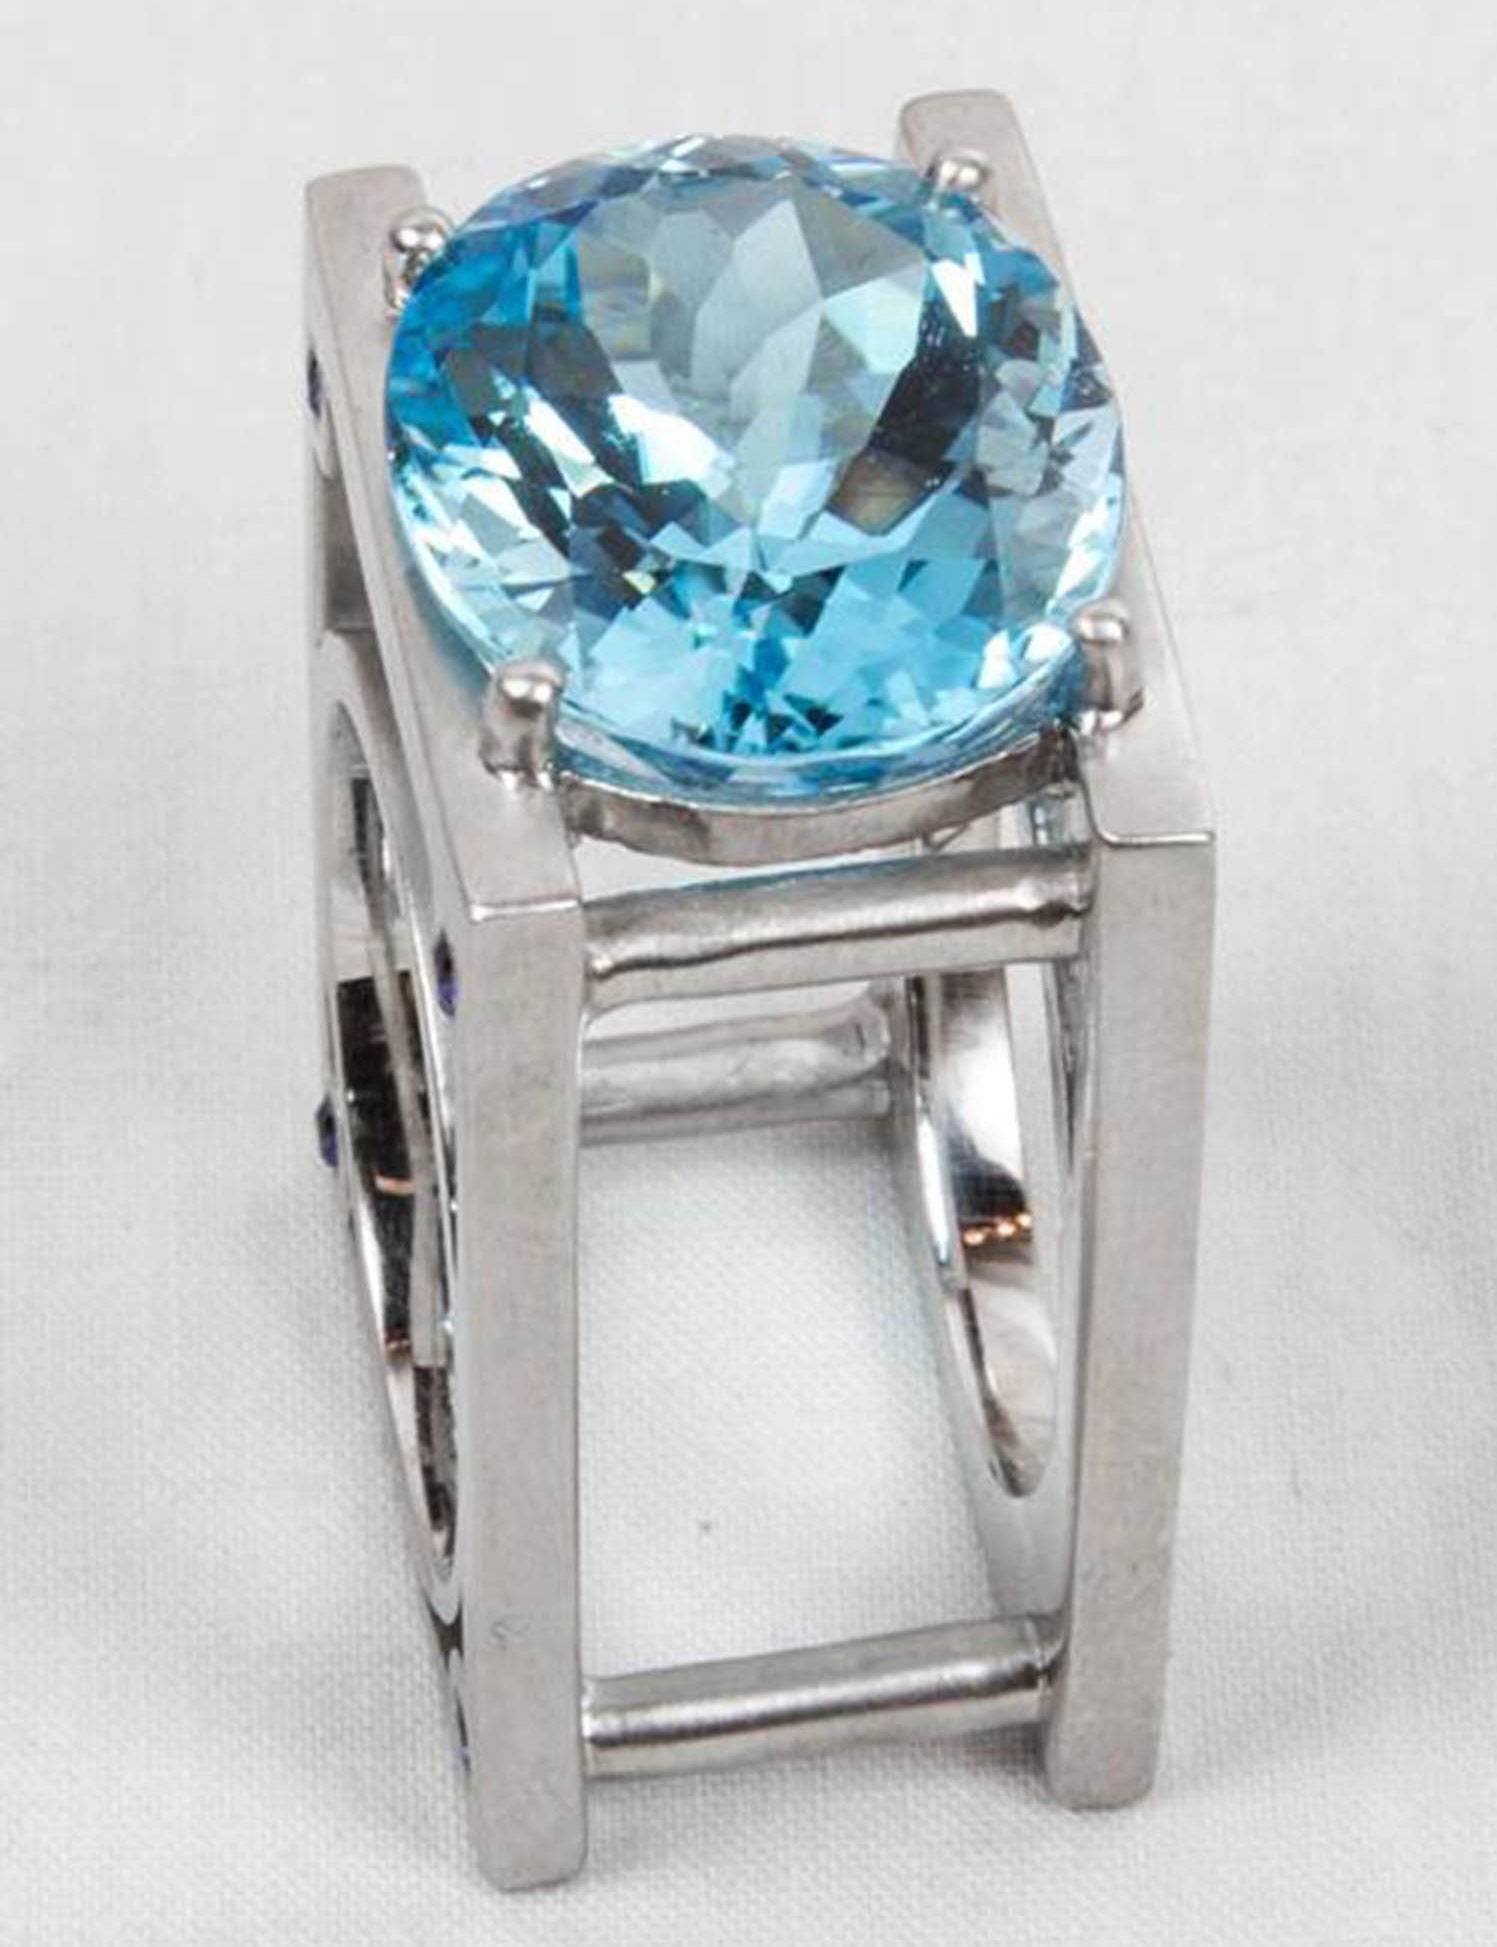 Sensational Sky Blue Topaz Statement Ring set with a large oval 23.62ct facet-cut blue topaz and 8 'rivets' set with small blue sapphires; .36ct; in a unique Industrial style Sterling Silver Rhodium Tarnish-resistant Satin finish mounting. More